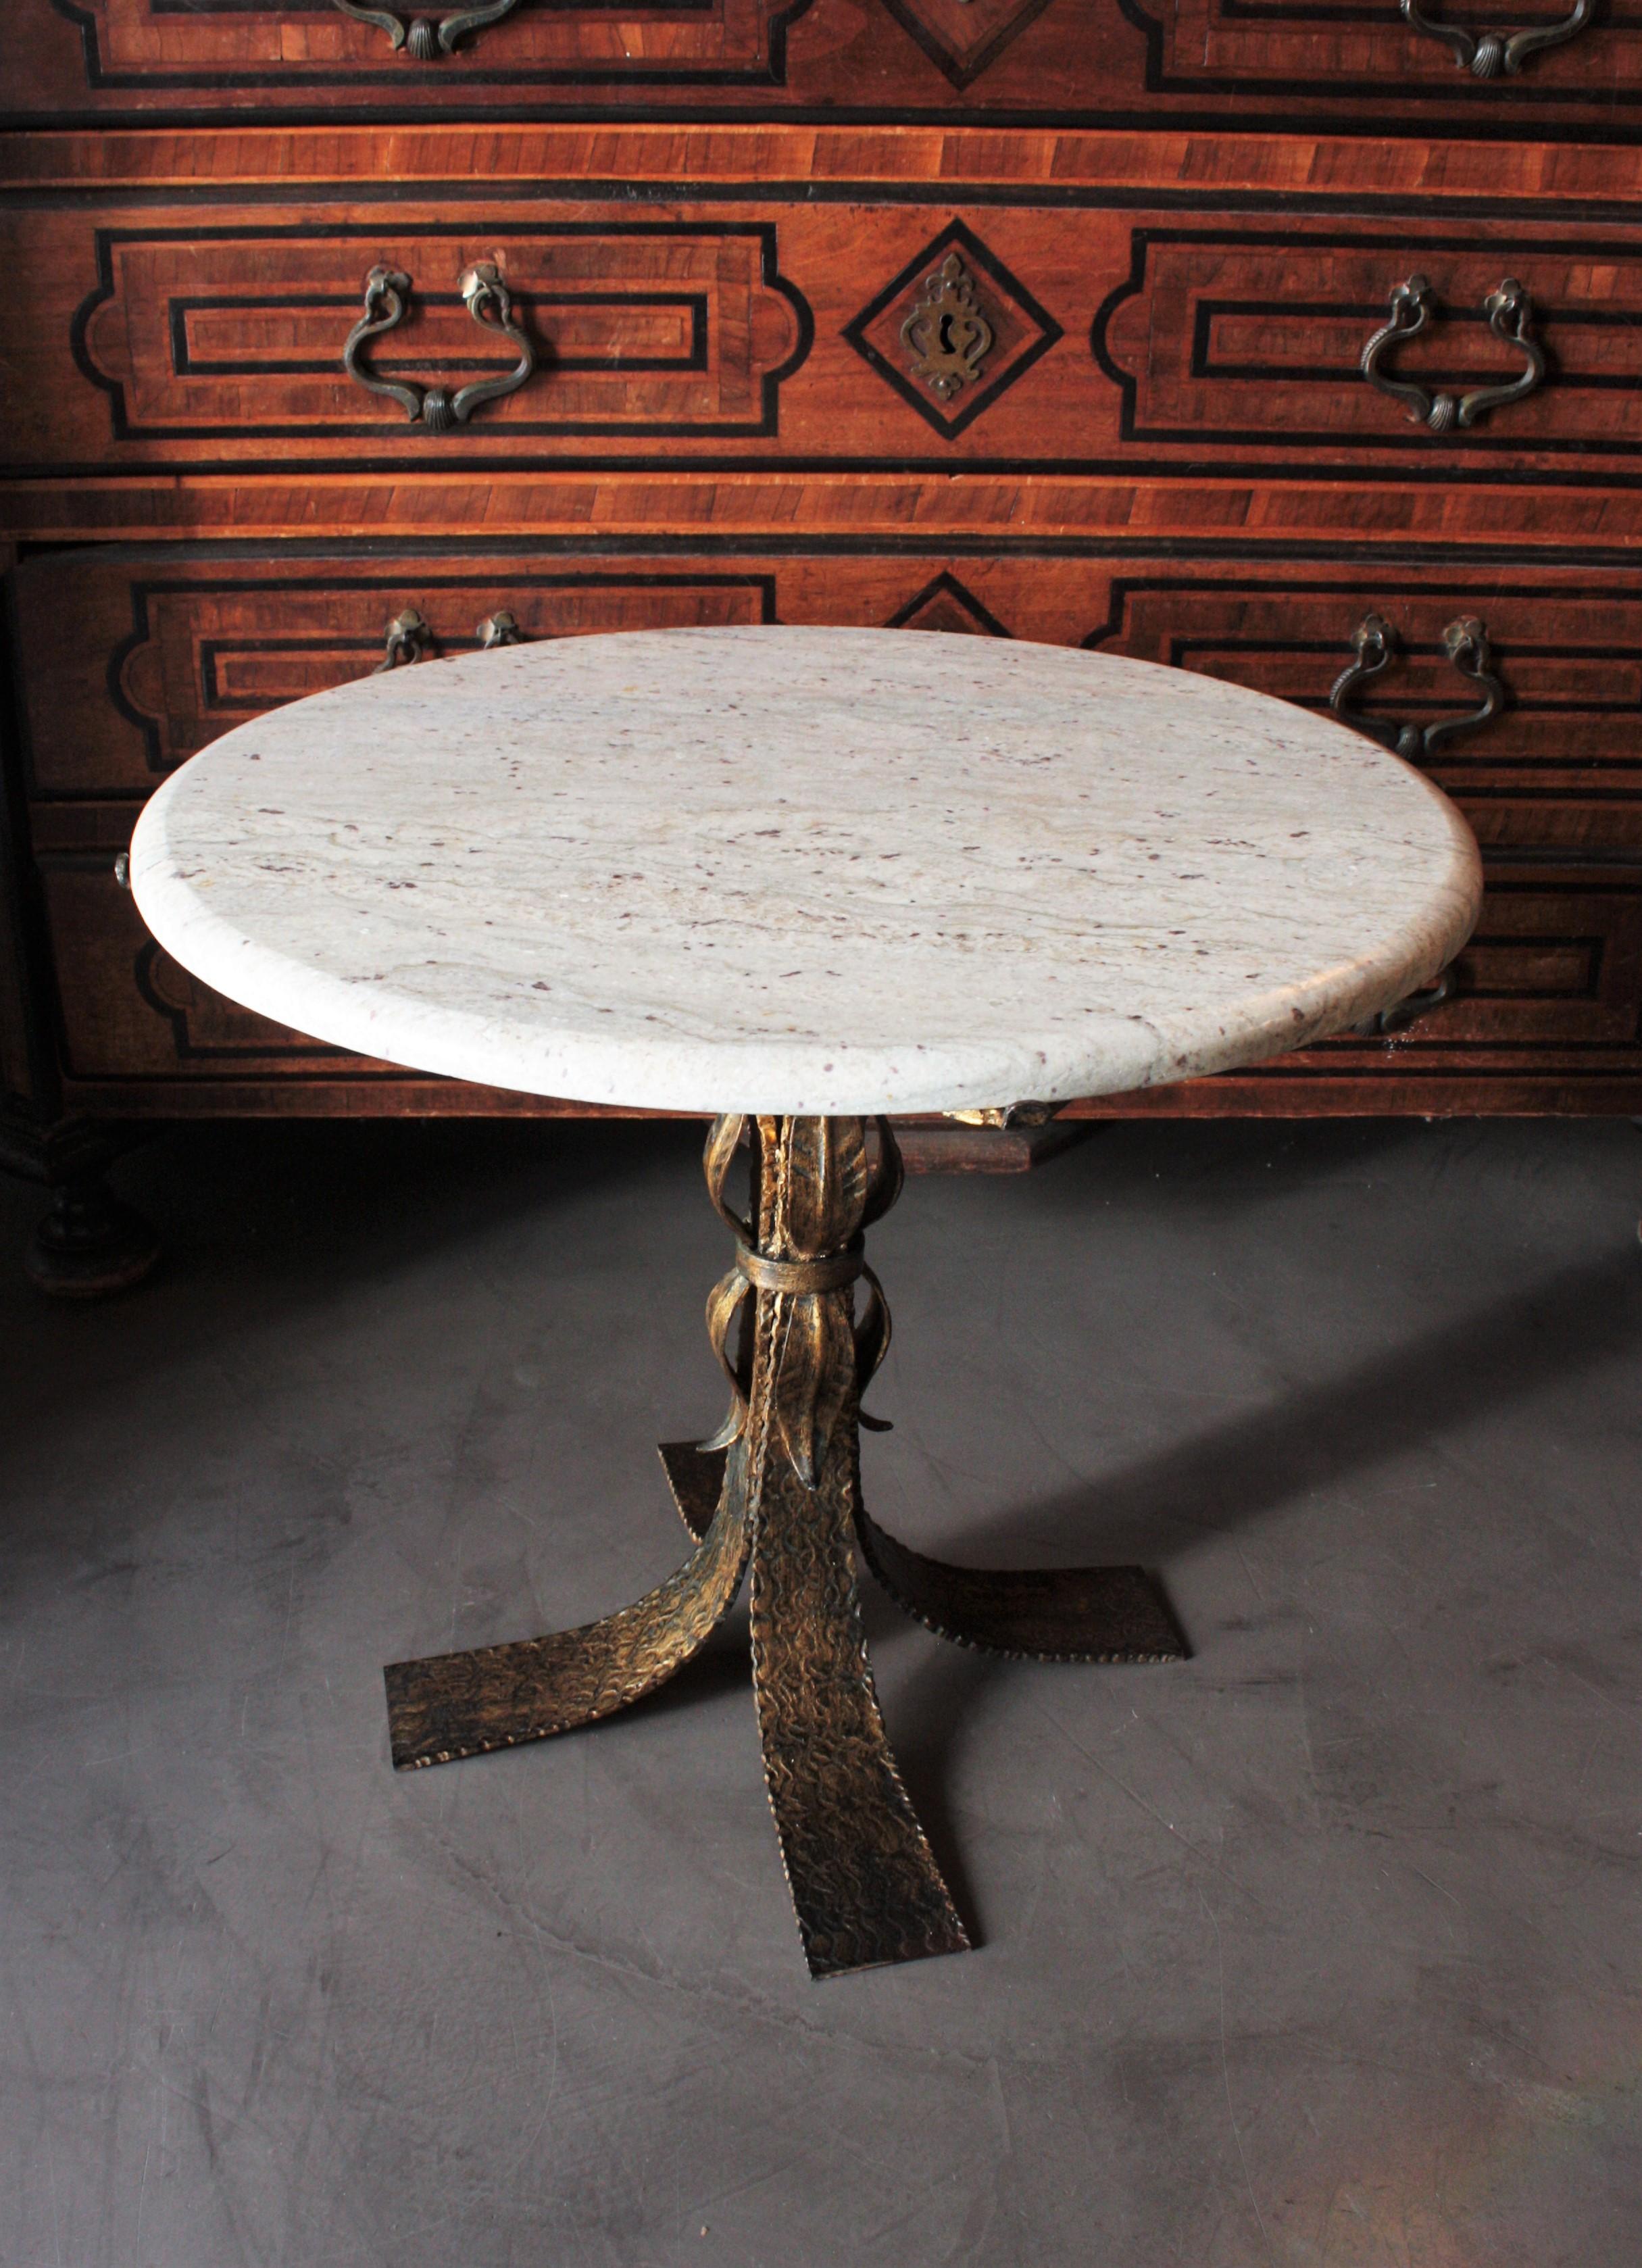 Eye-catching Mid-Century Modern gilt wrought iron low table with round white marble top. Spain, 1950s.
This side table has a beautiful spotted white marble top standing up on a wrought iron four feet base with leaf details. It retains rests of its